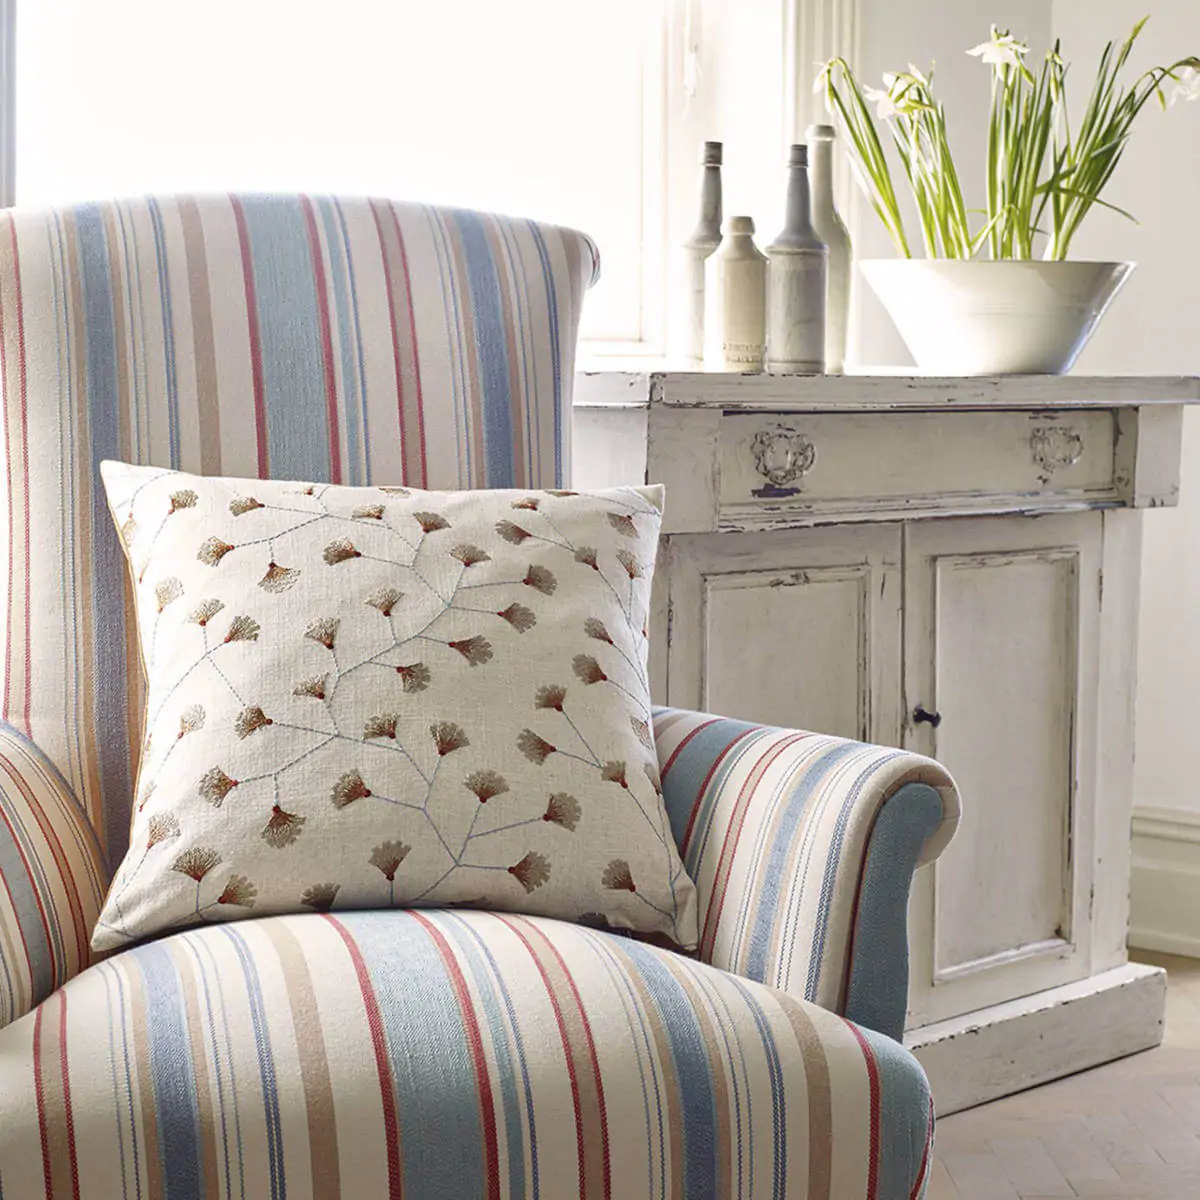 12 Best Upholstery Fabrics: How to Choose Fabric for Your Furniture